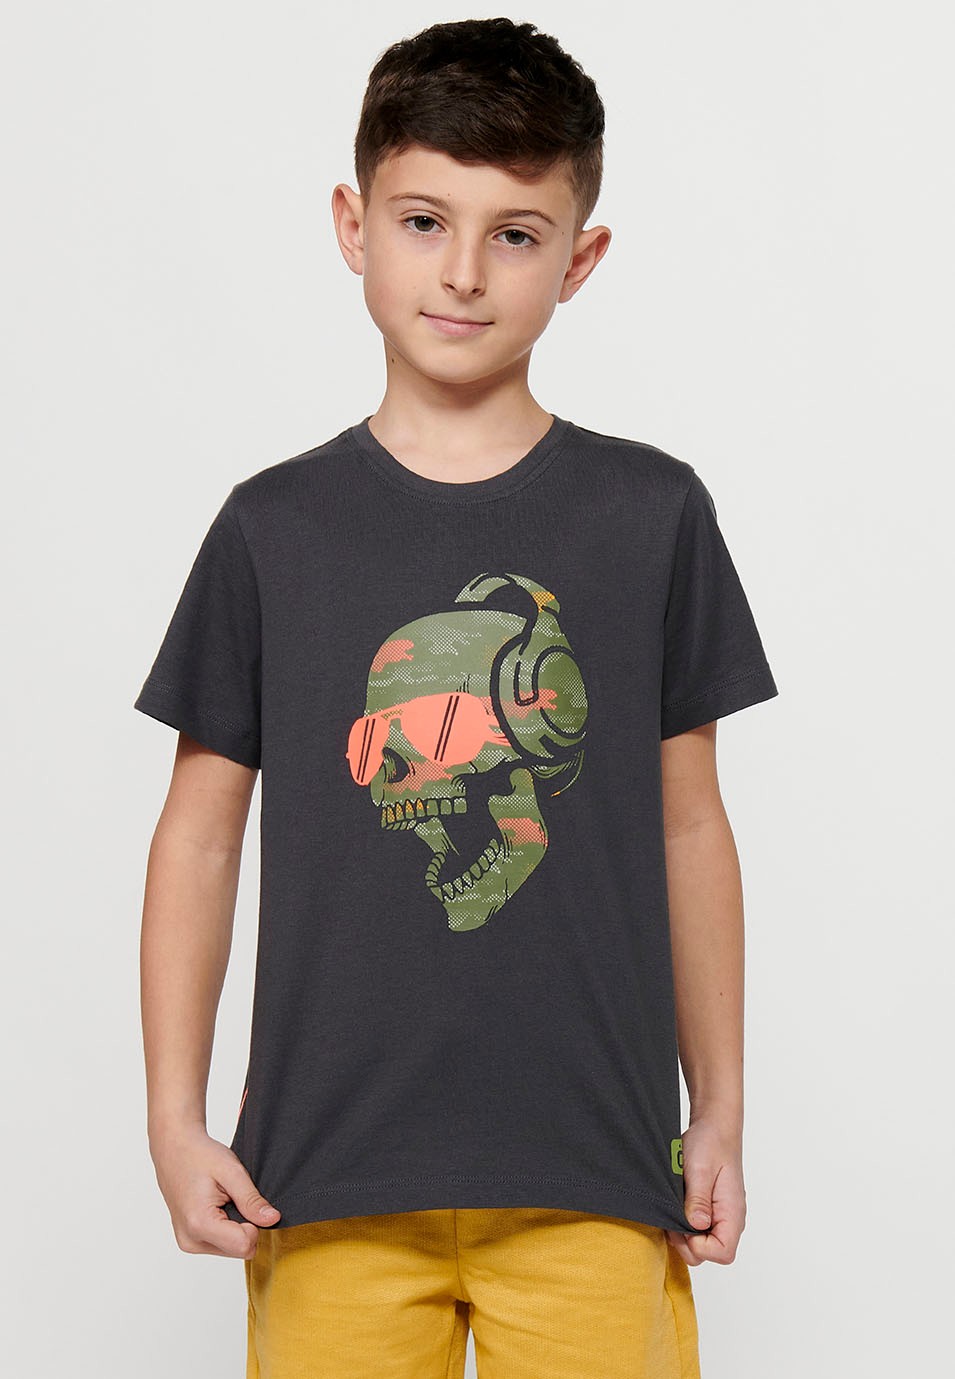 Short-sleeved Cotton Round Neck T-shirt with Dark Gray Front Print for Boys 2